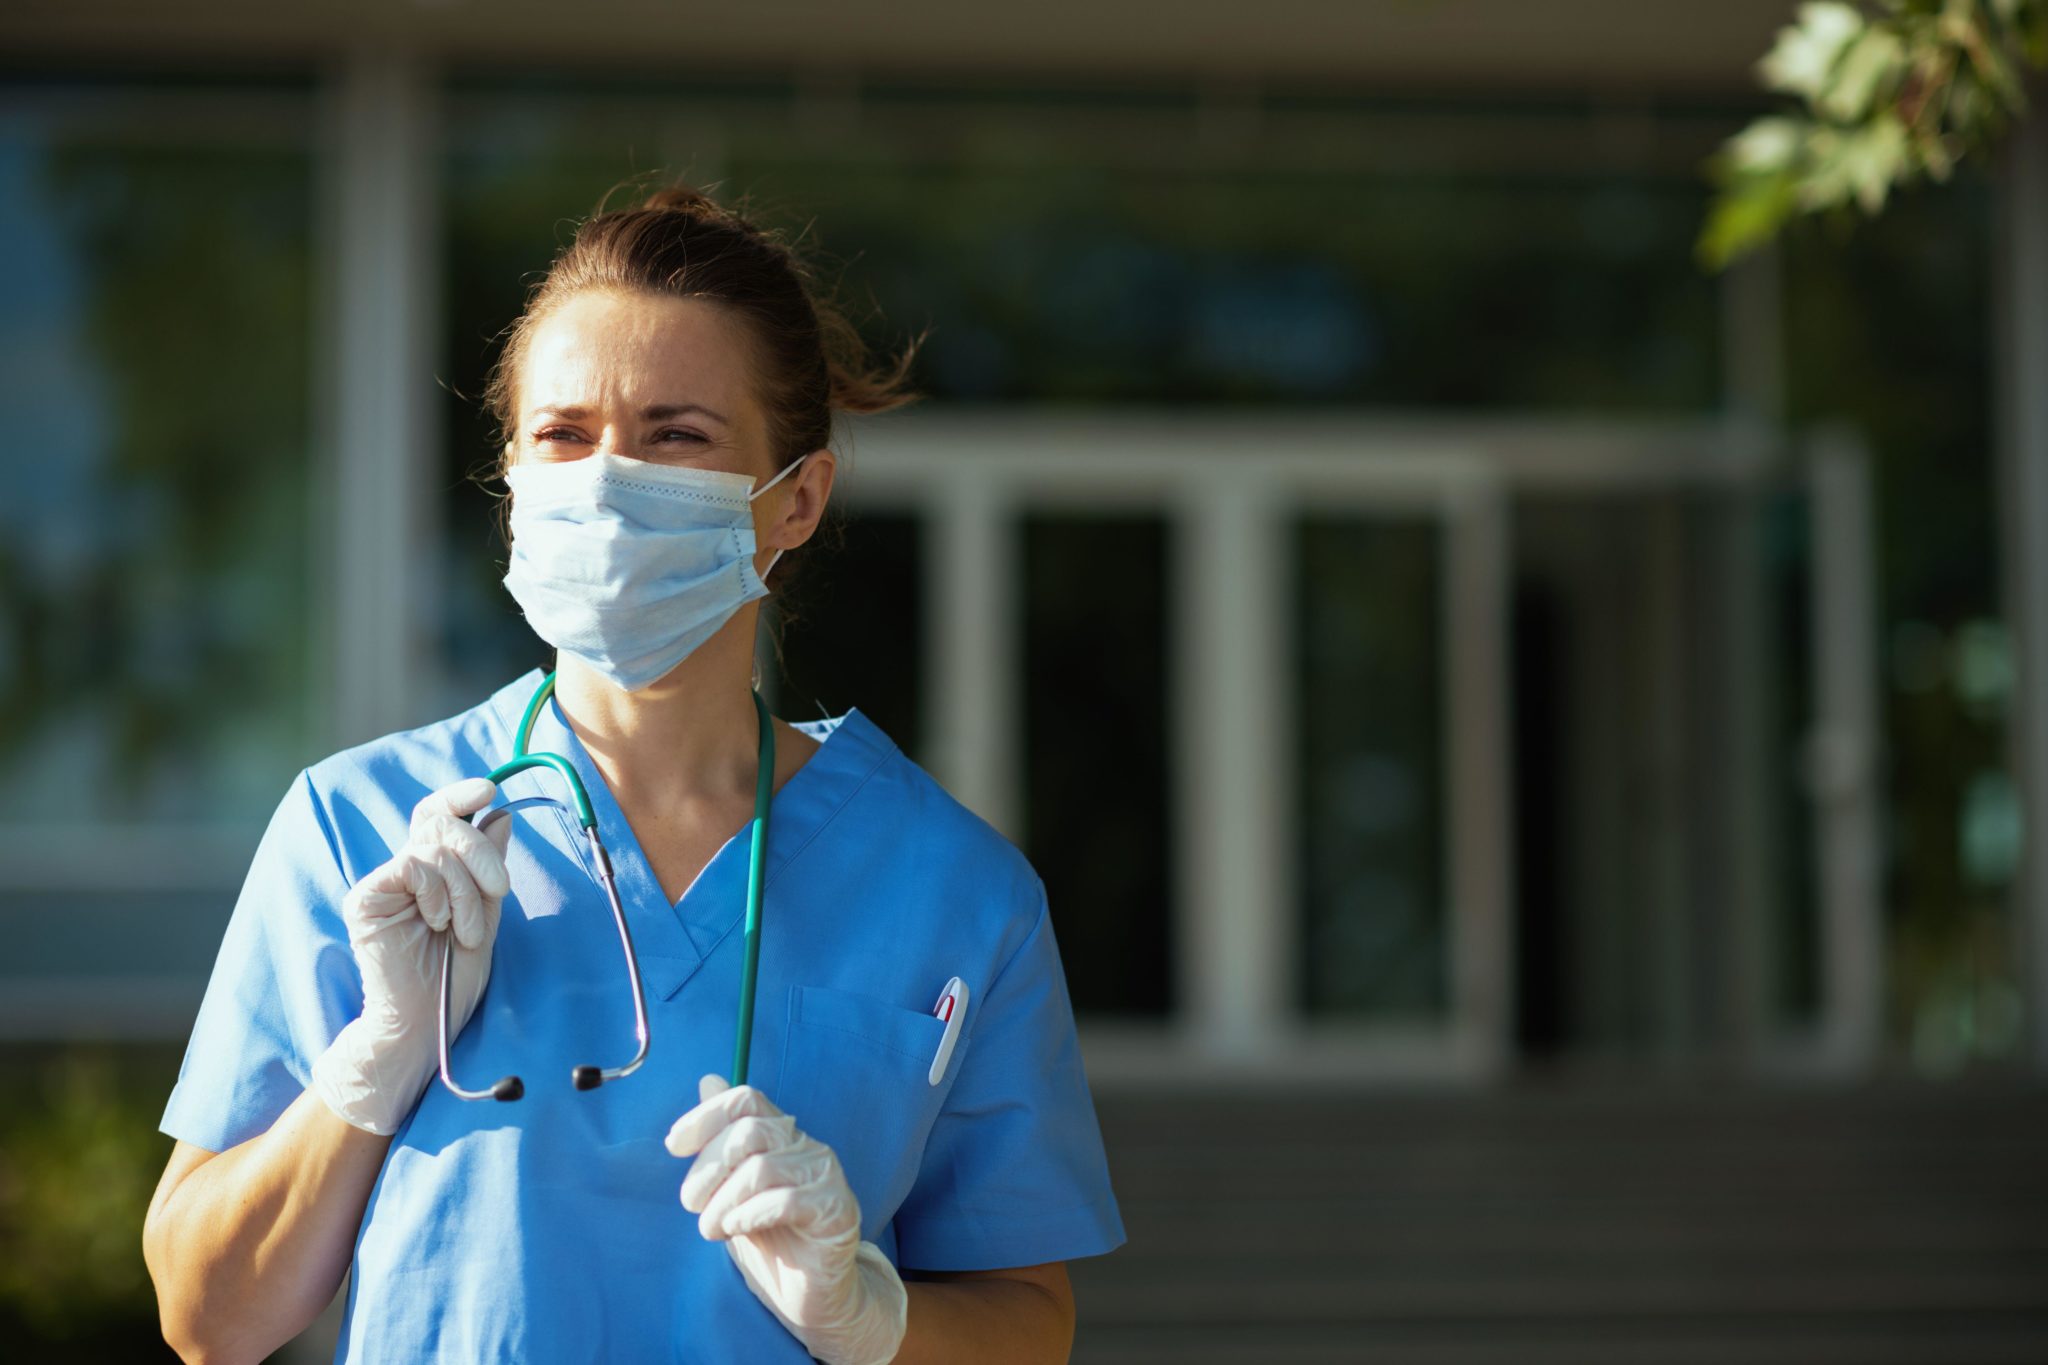 A physician in uniform with a stethoscope is seen near a hospital.